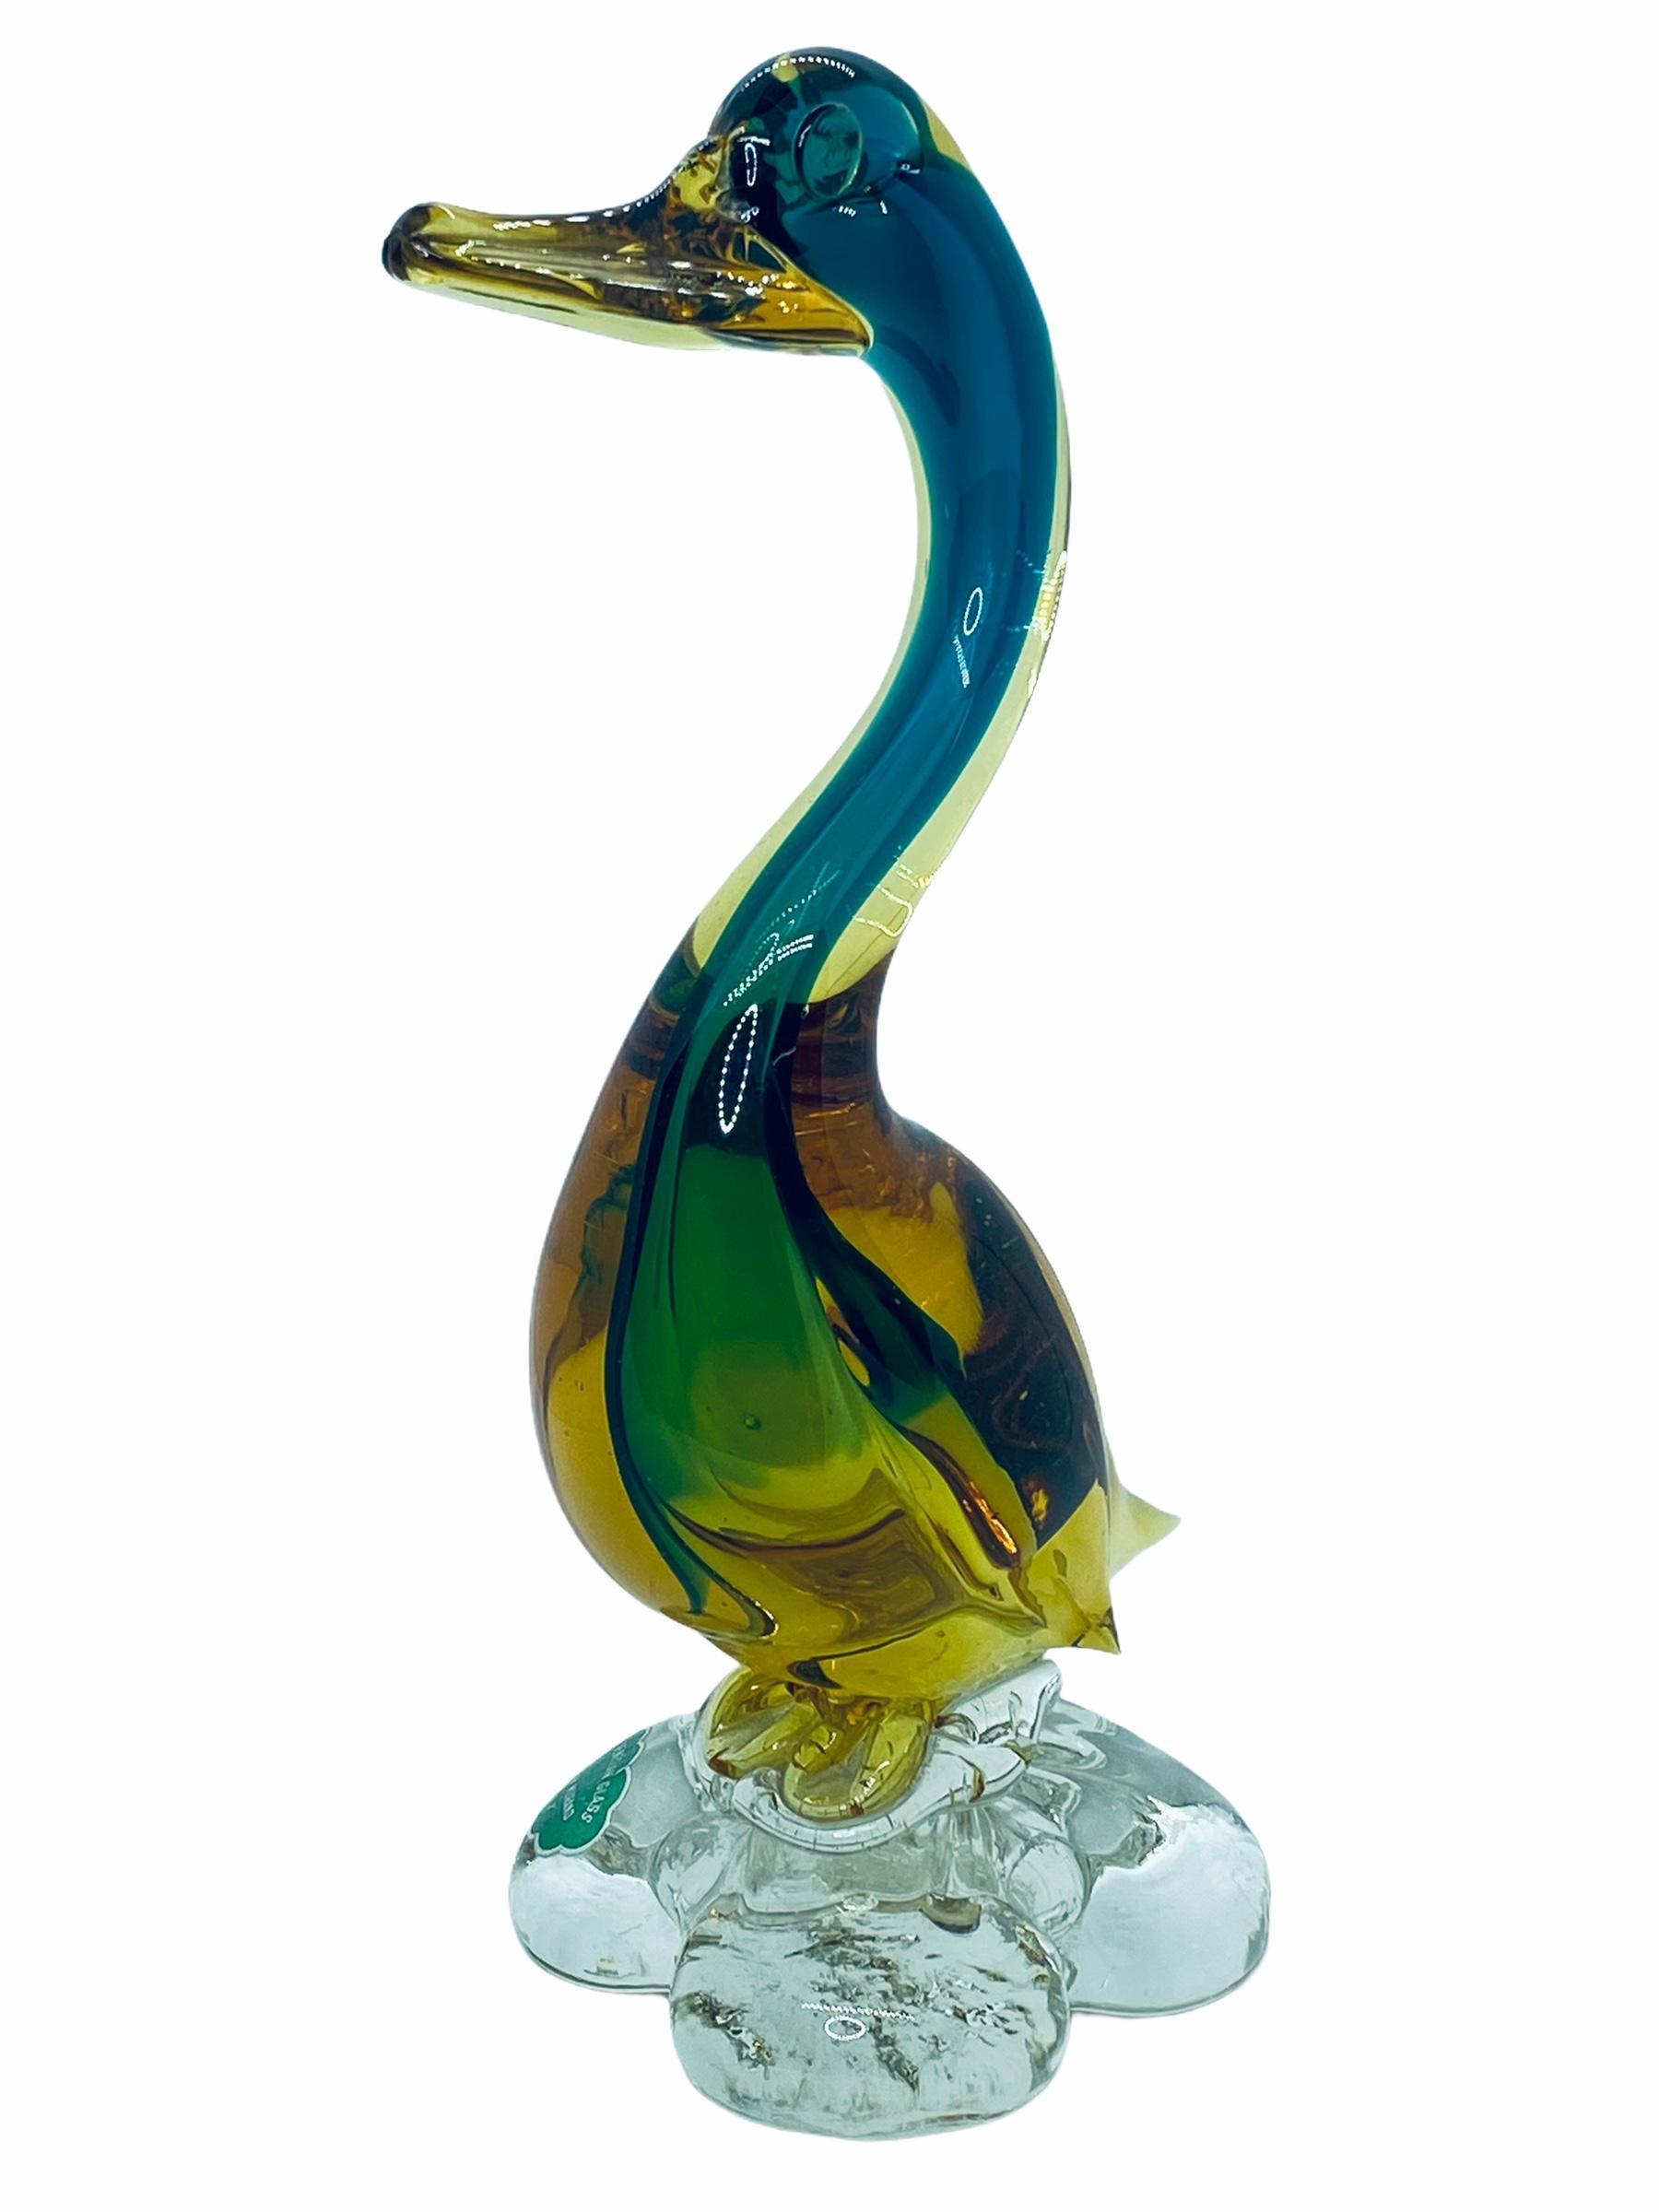 A Venetian sculptural duck figurine in hand blown glass, produced on the isle of Murano, circa 1950s. A nice piece of art for any room.